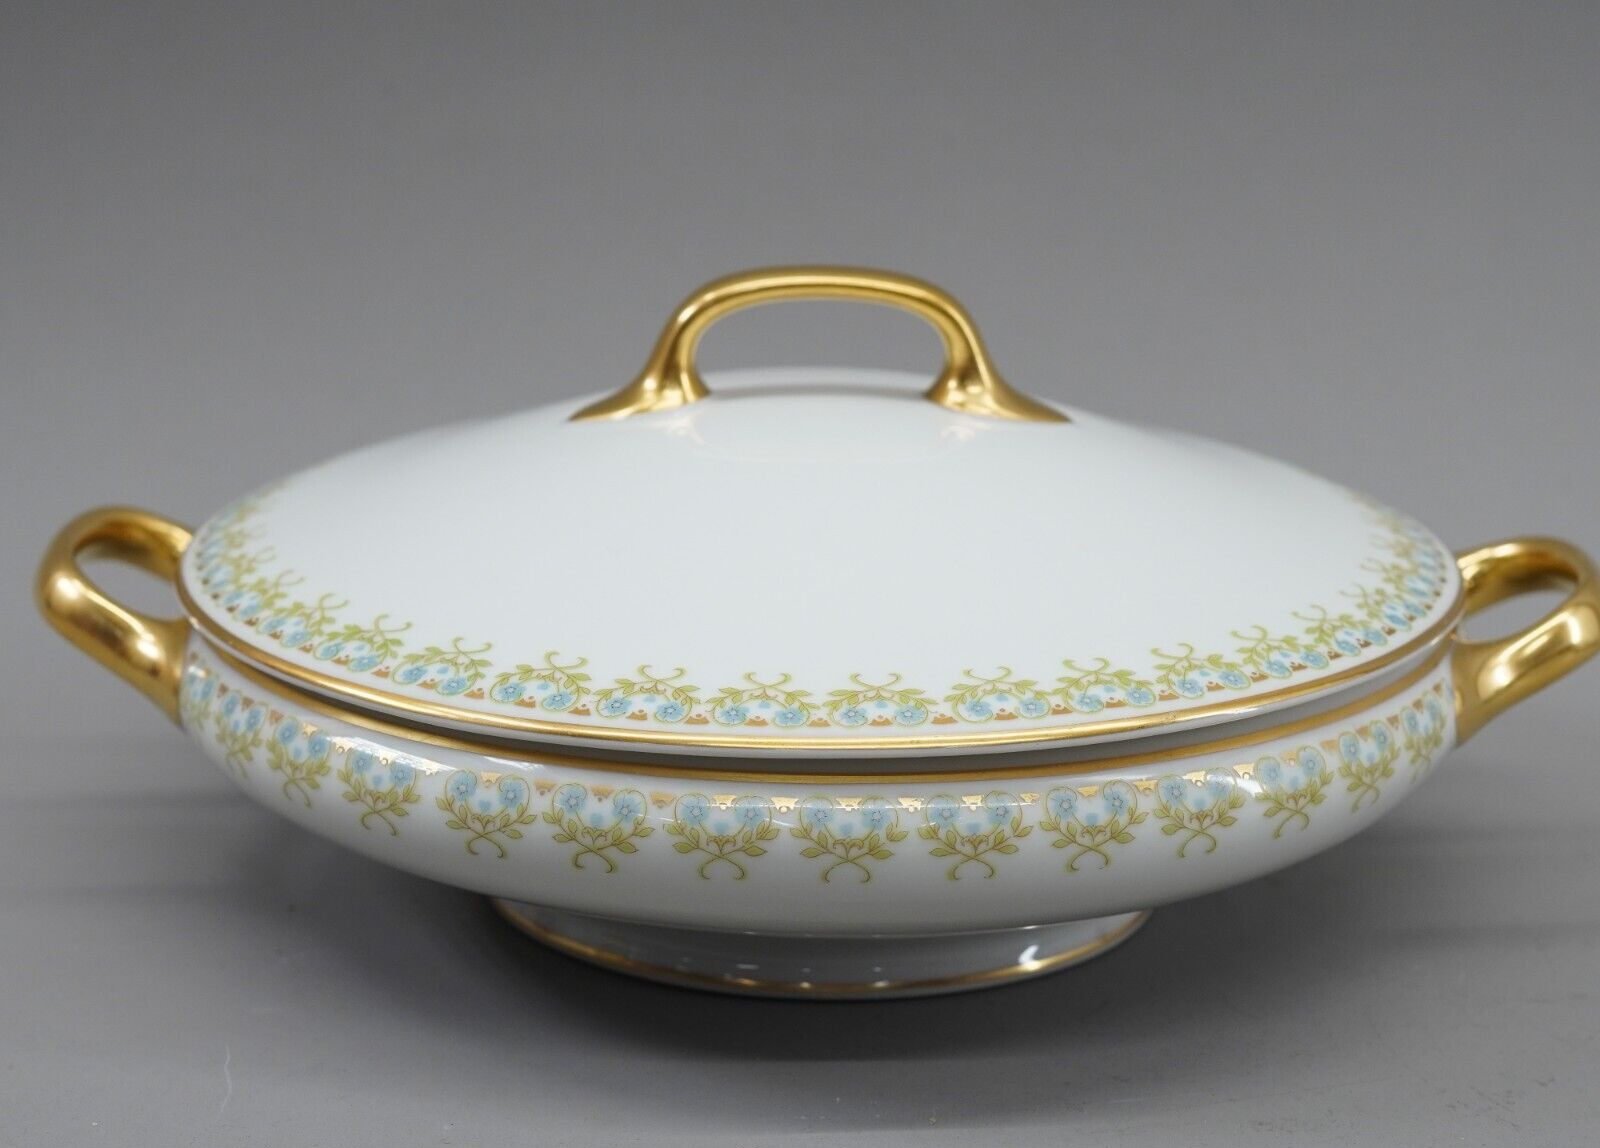 Limoges Old Abbey Covered Casserole Dish # 1 Fine China Gold Accents Made France